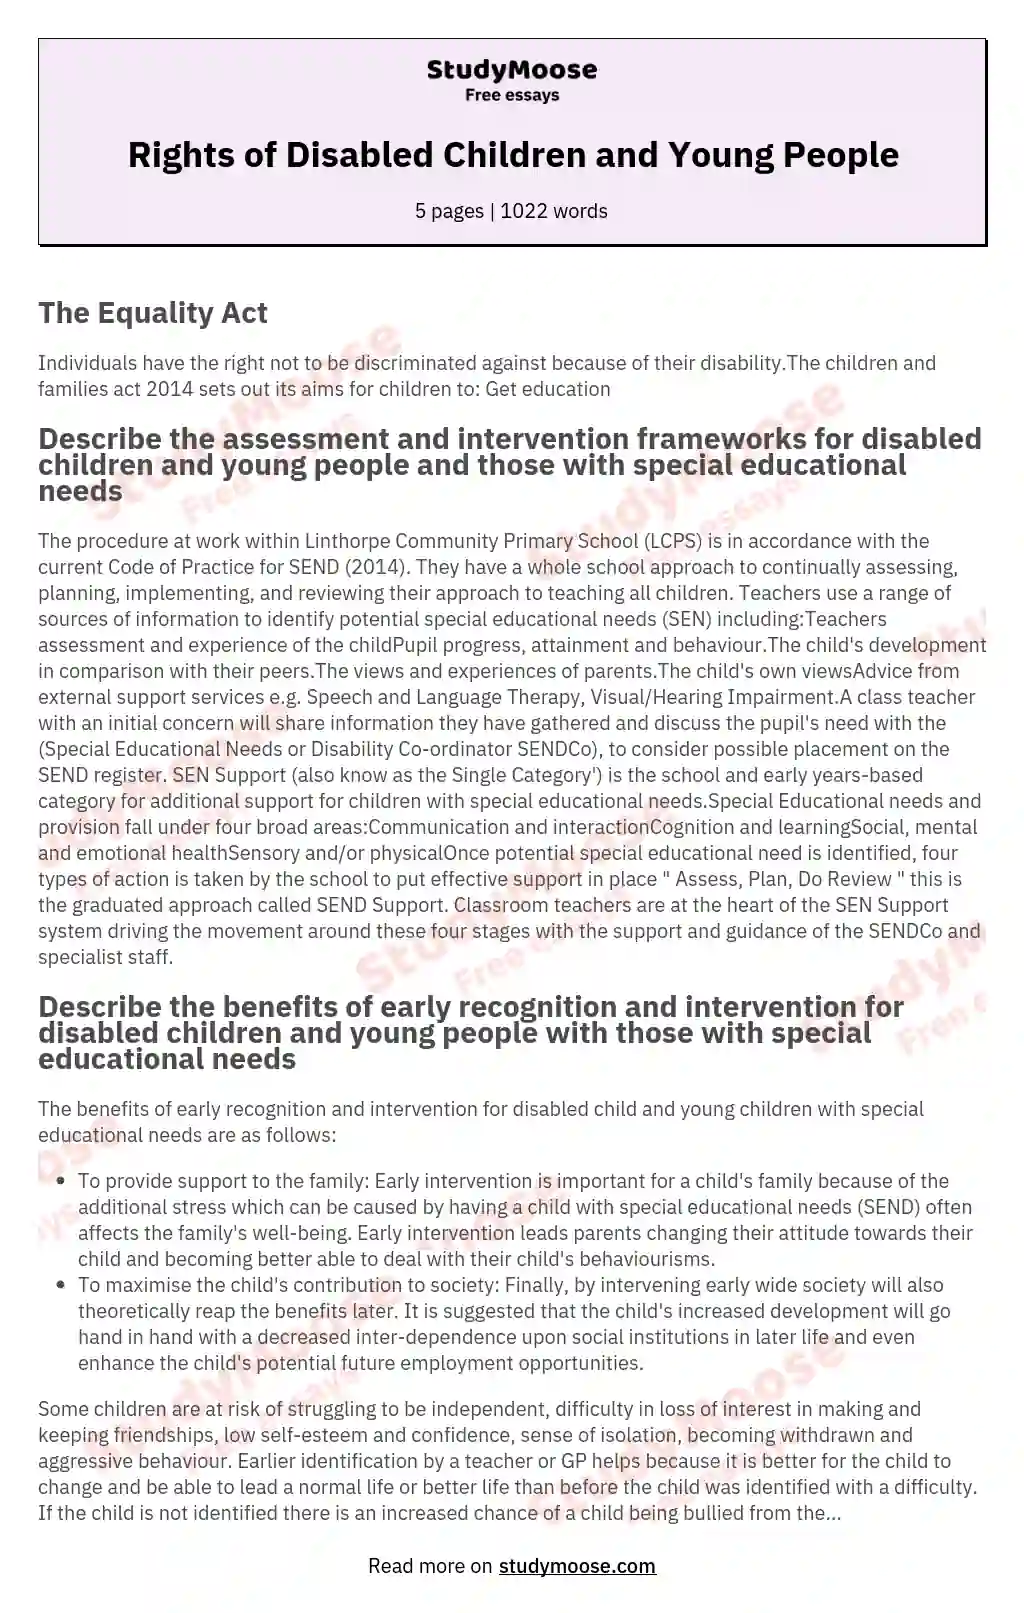 Rights of Disabled Children and Young People